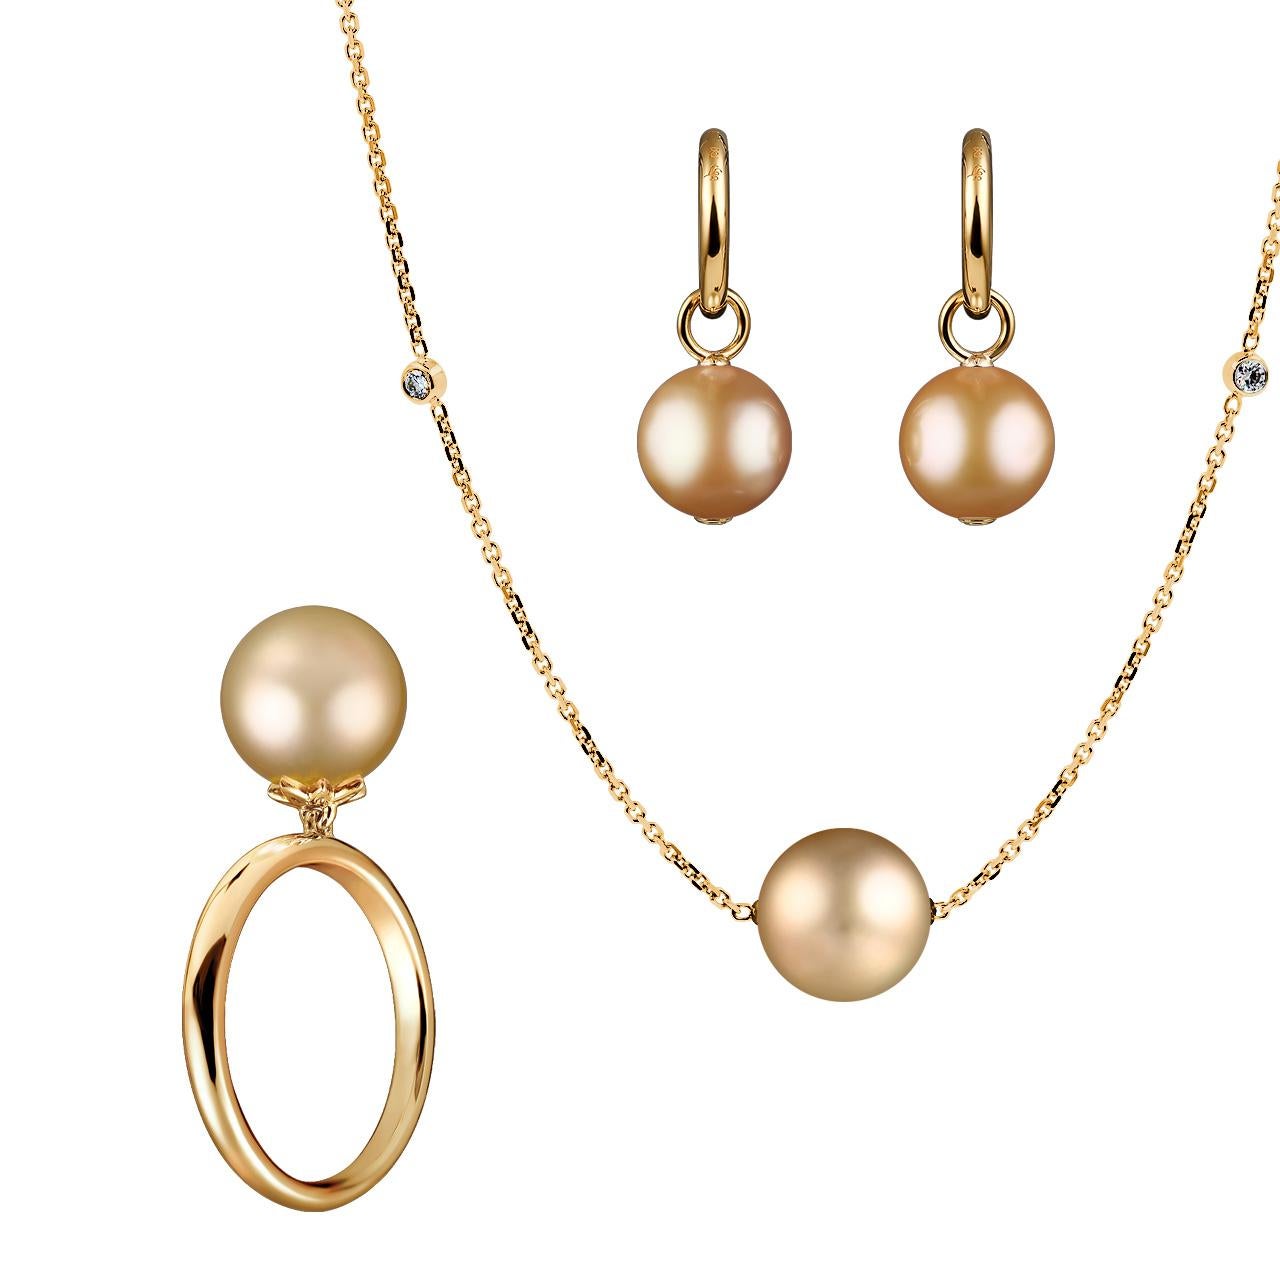 Contemporary 14 Karat Yellow Gold Earrings with Free Moving Golden South Sea Pearl For Sale